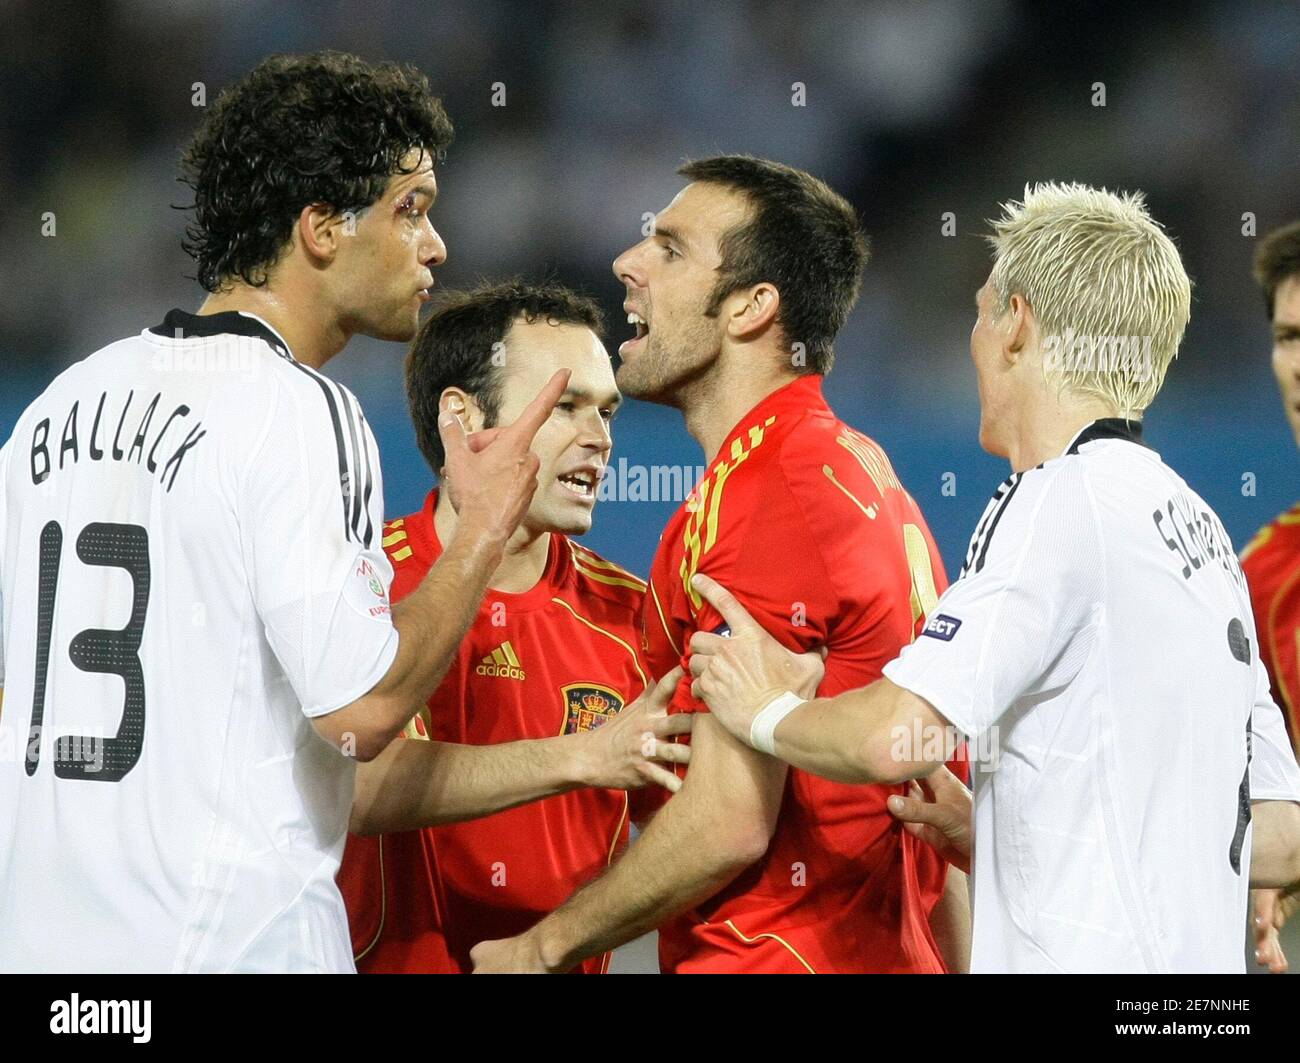 Carlos marchena hi-res stock photography and images - Alamy